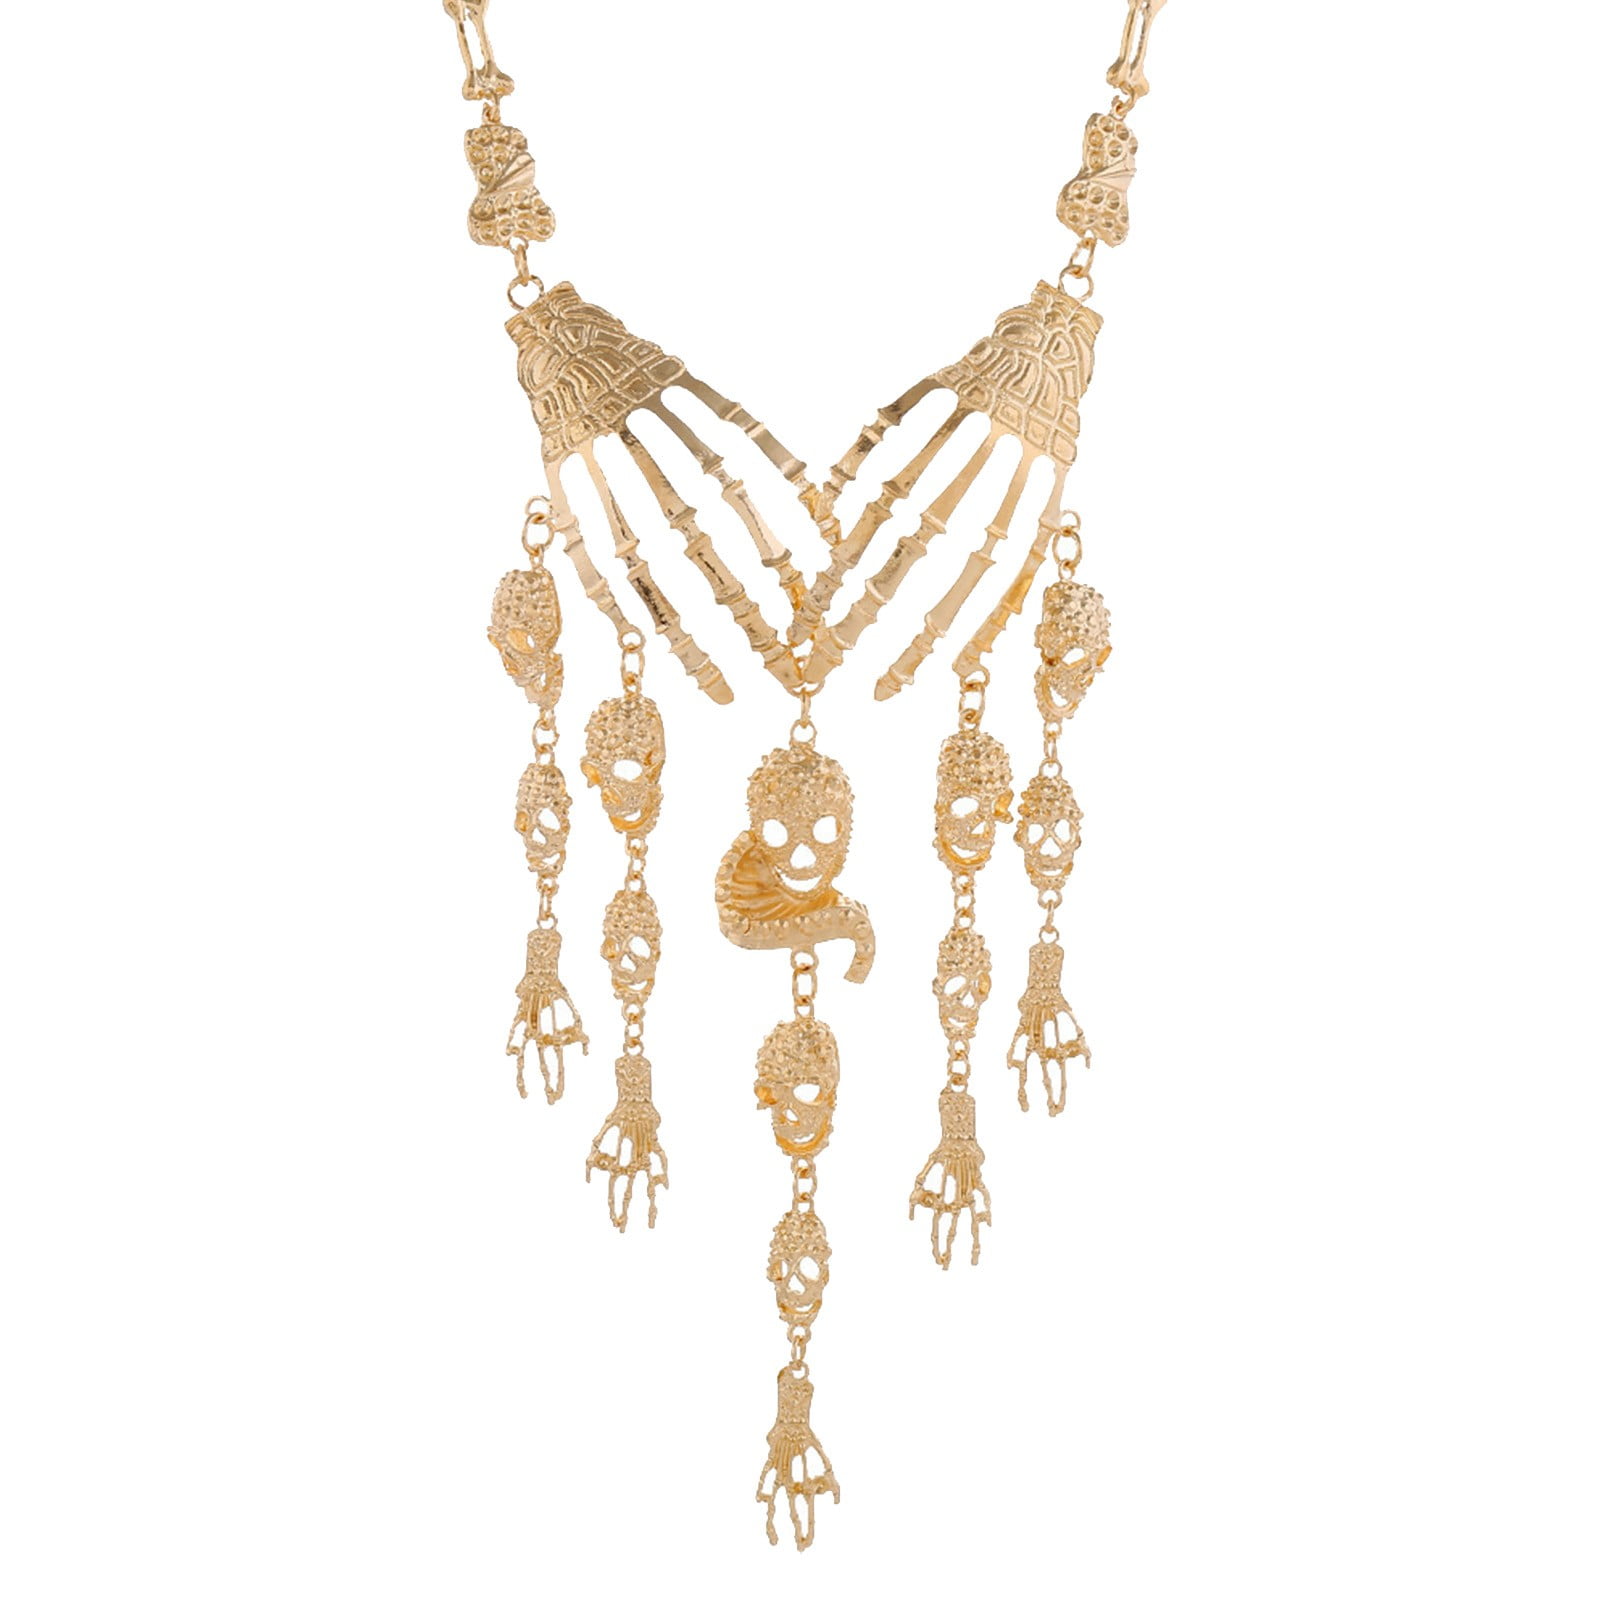 Fossil Statement Necklace gold-colored elegant Jewelry Chains Statement Necklaces 